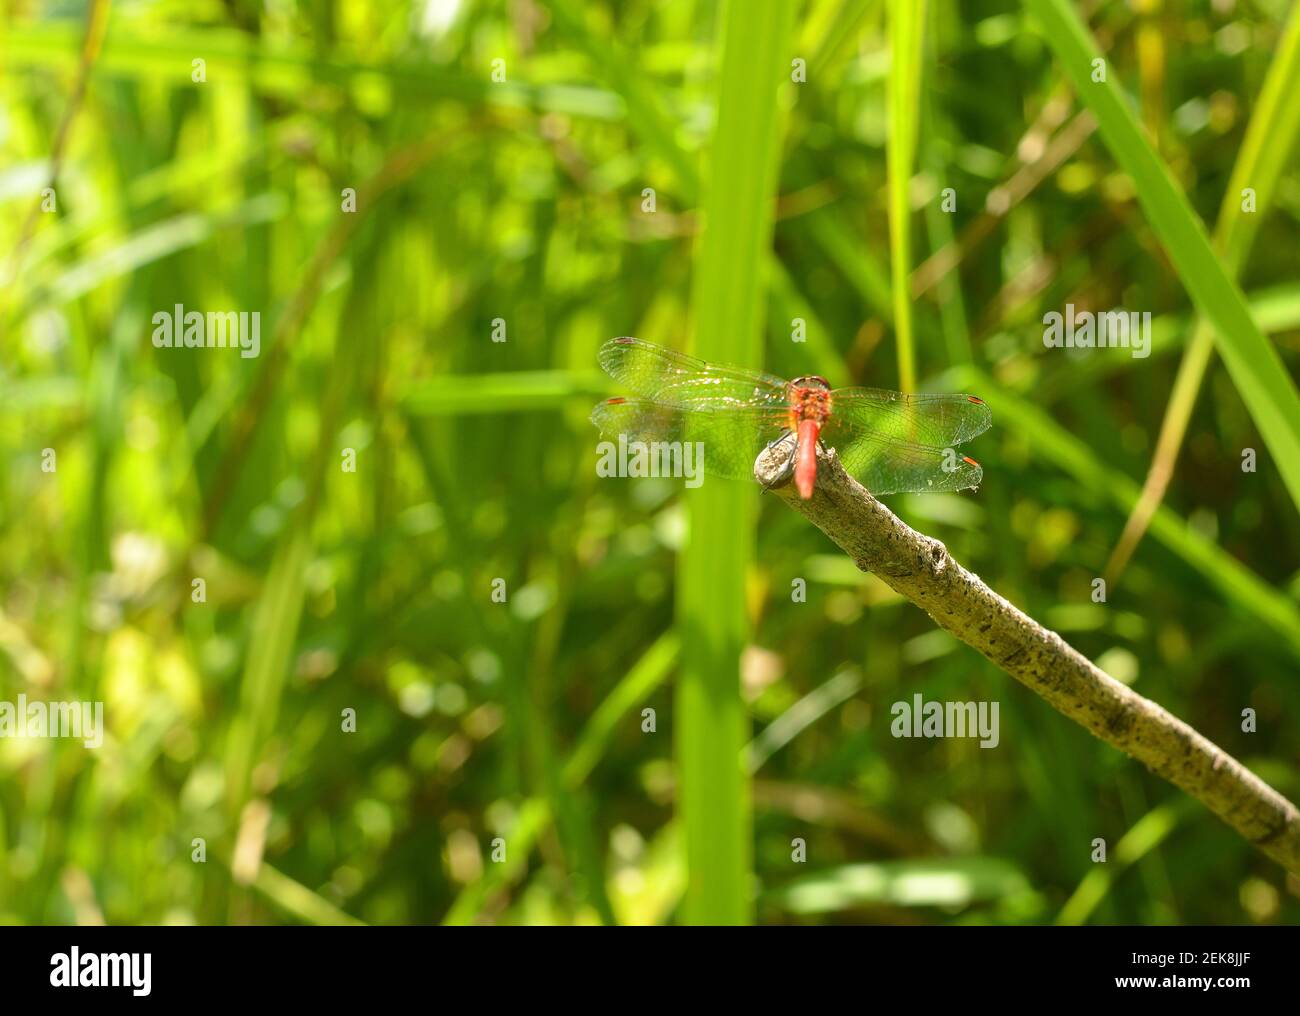 Red dragonfly sitting on a branch in the nature Stock Photo